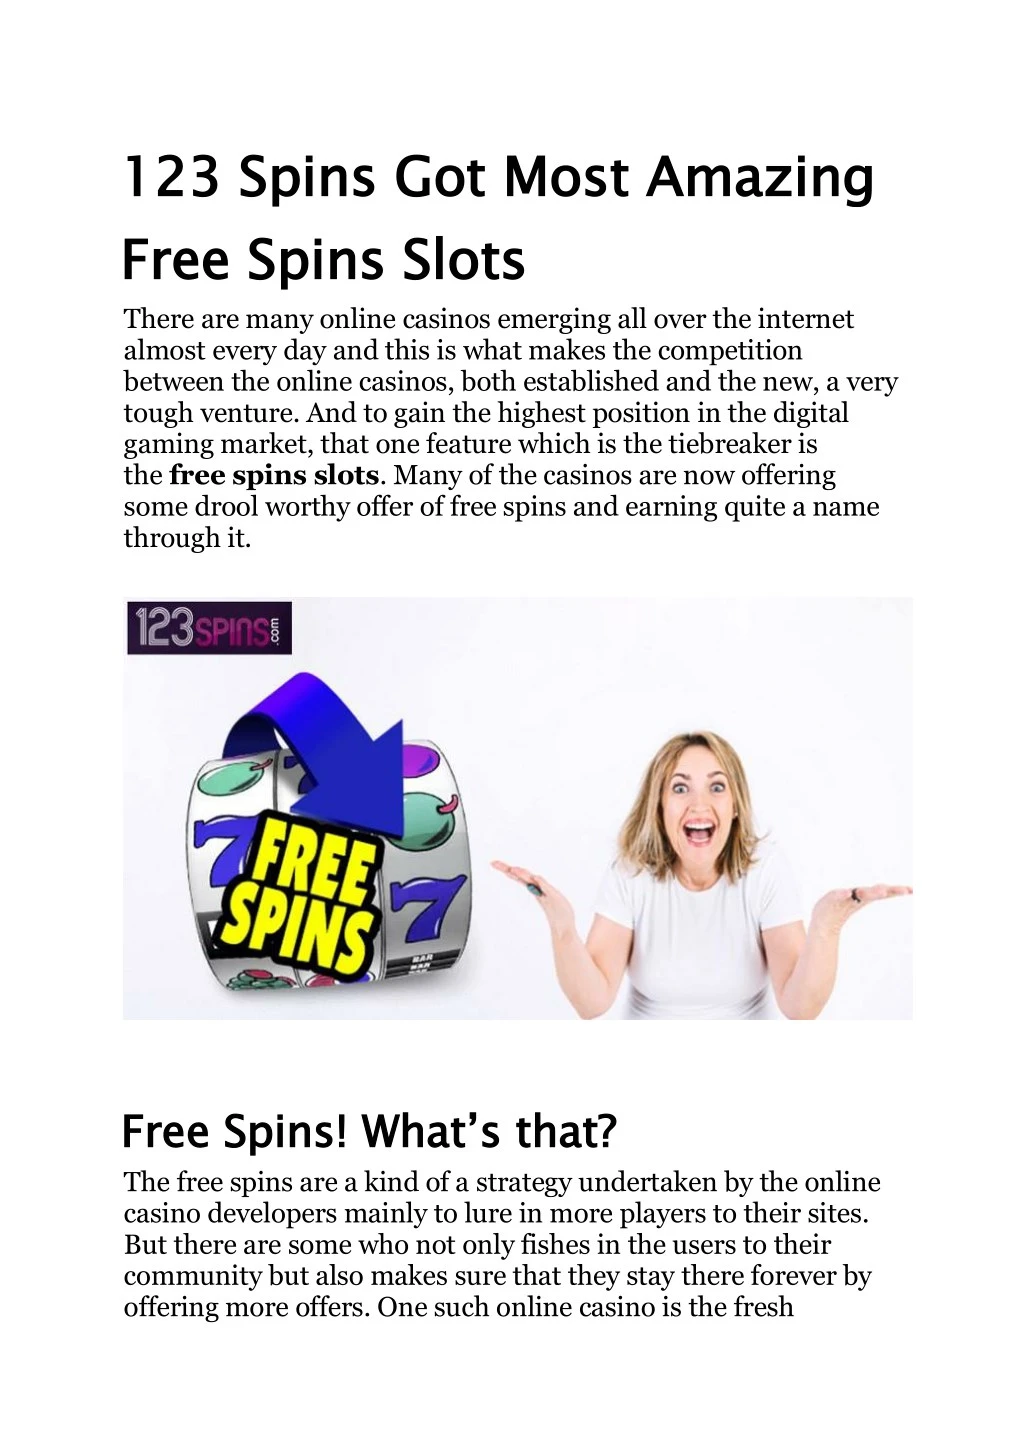 123 spins got most amazing free spins there n.